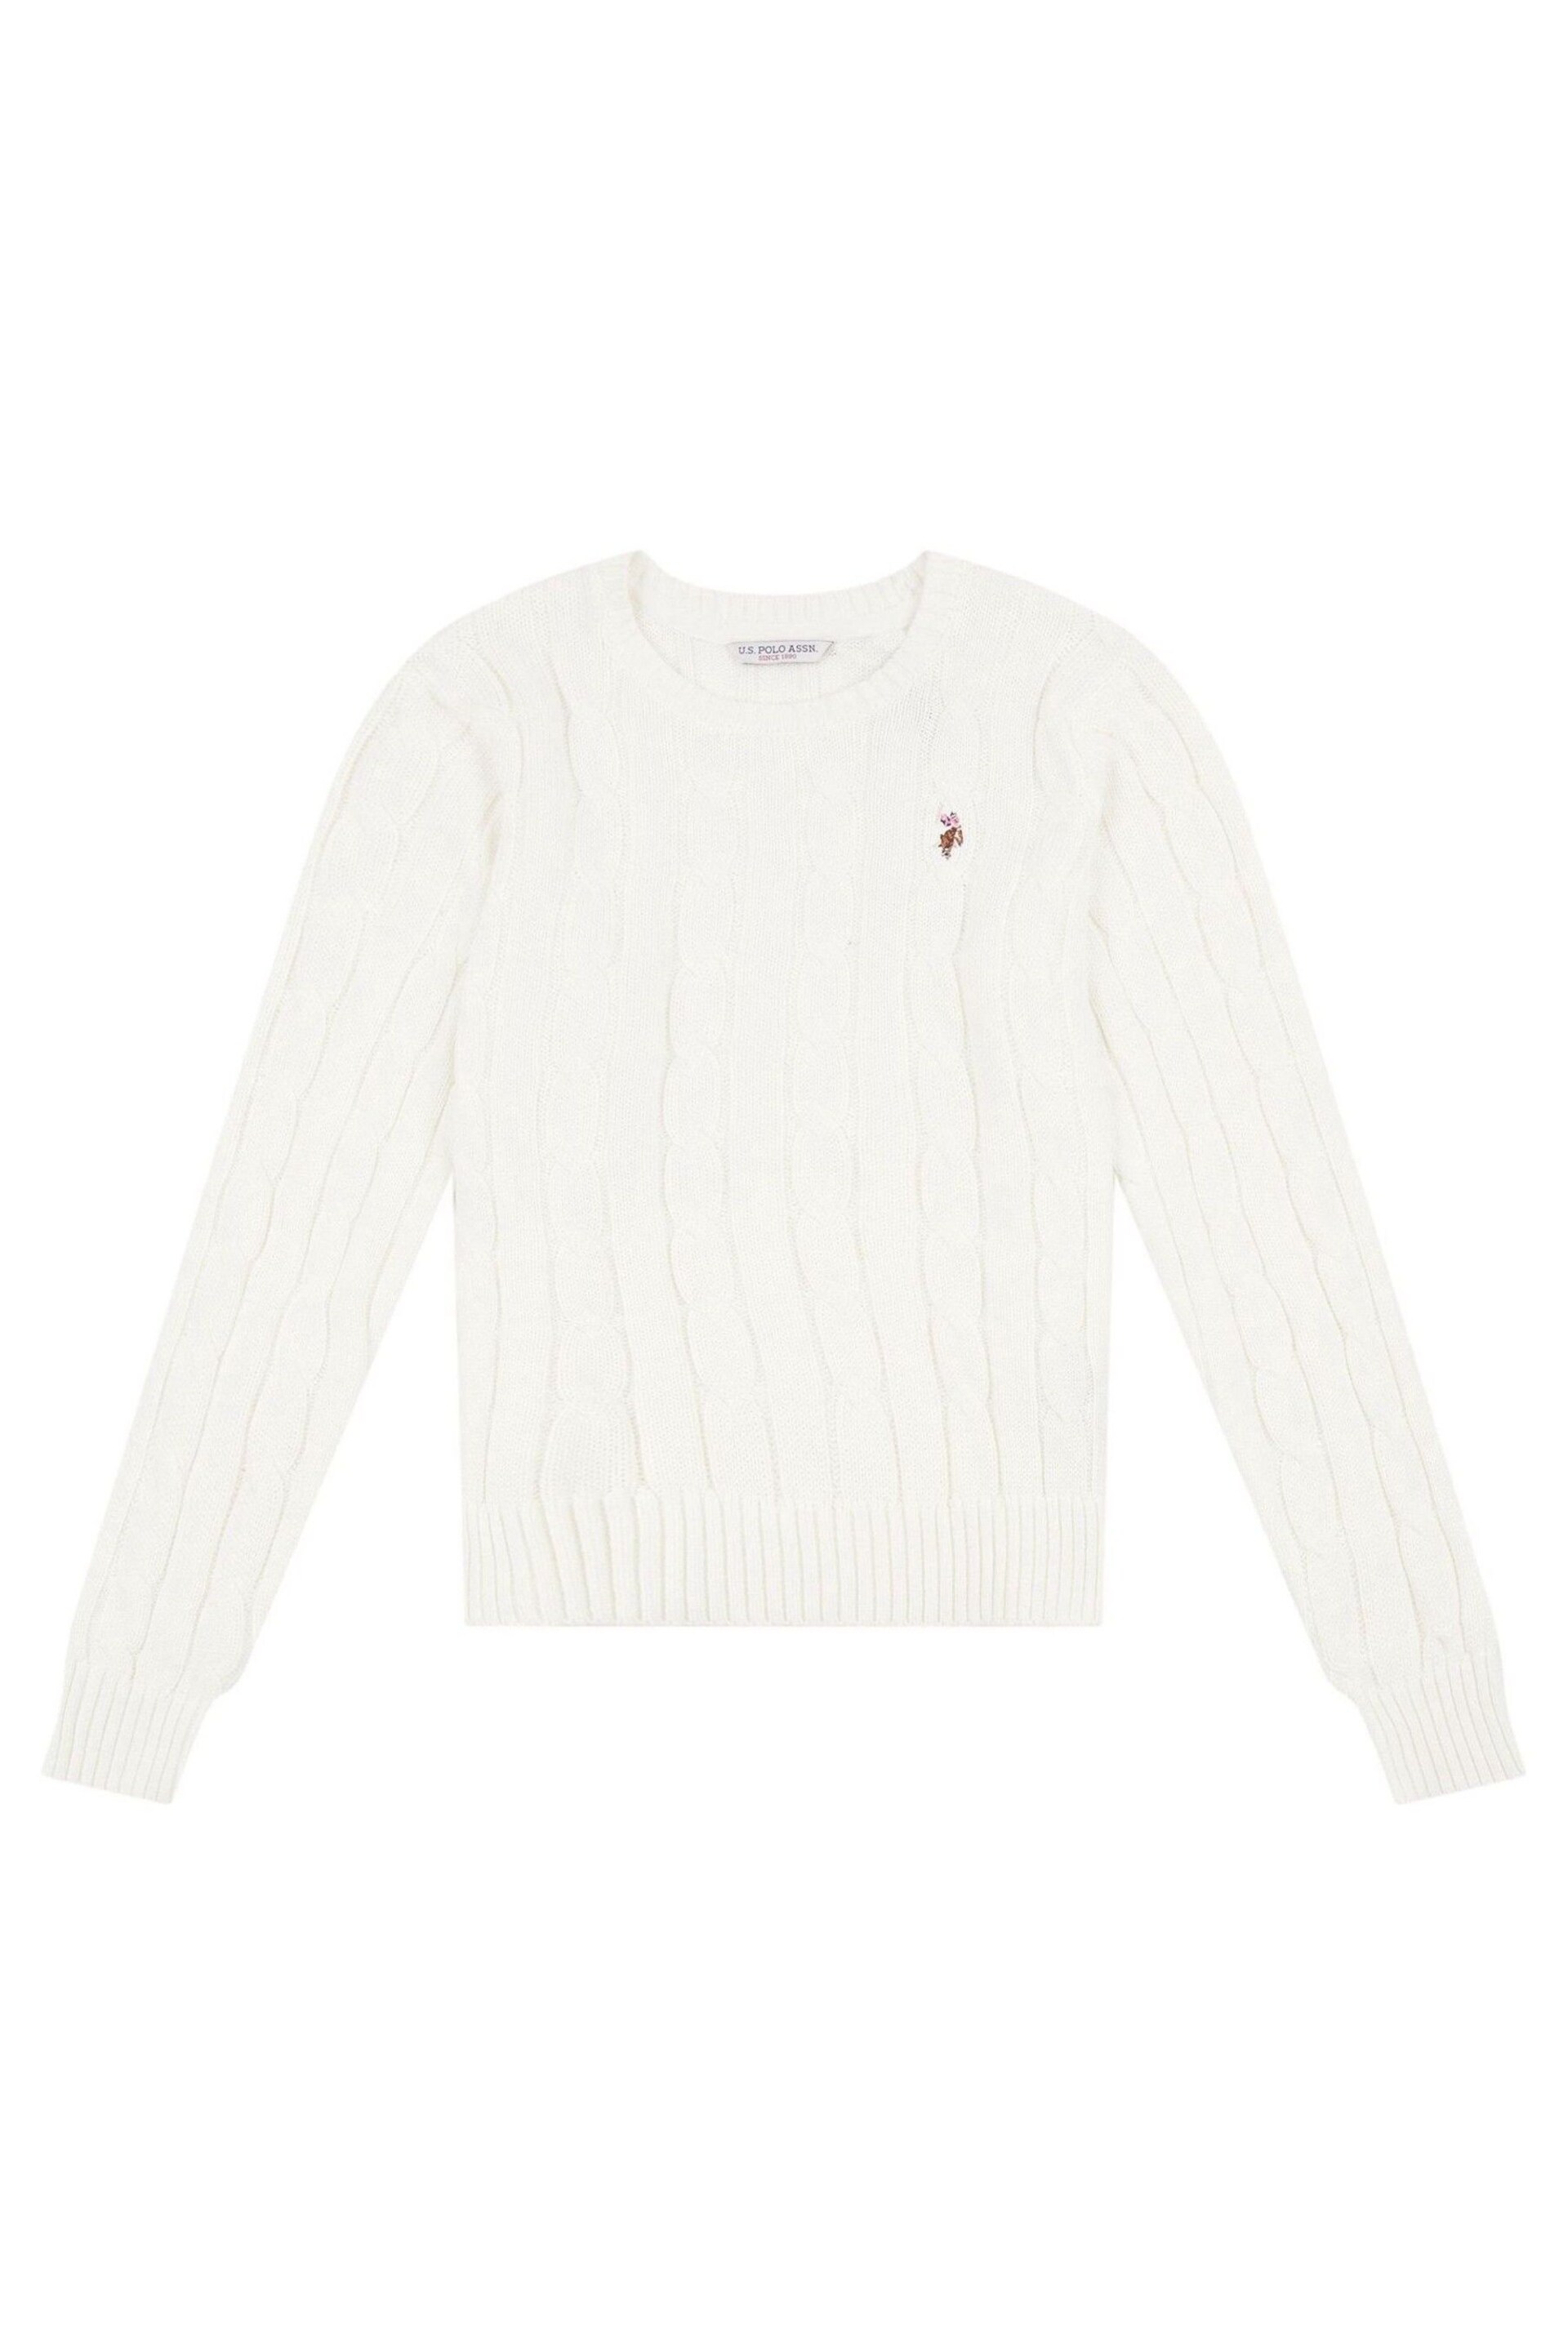 U.S. Polo Assn. Womens V-Neck Cable Knit White Jumper - Image 6 of 8